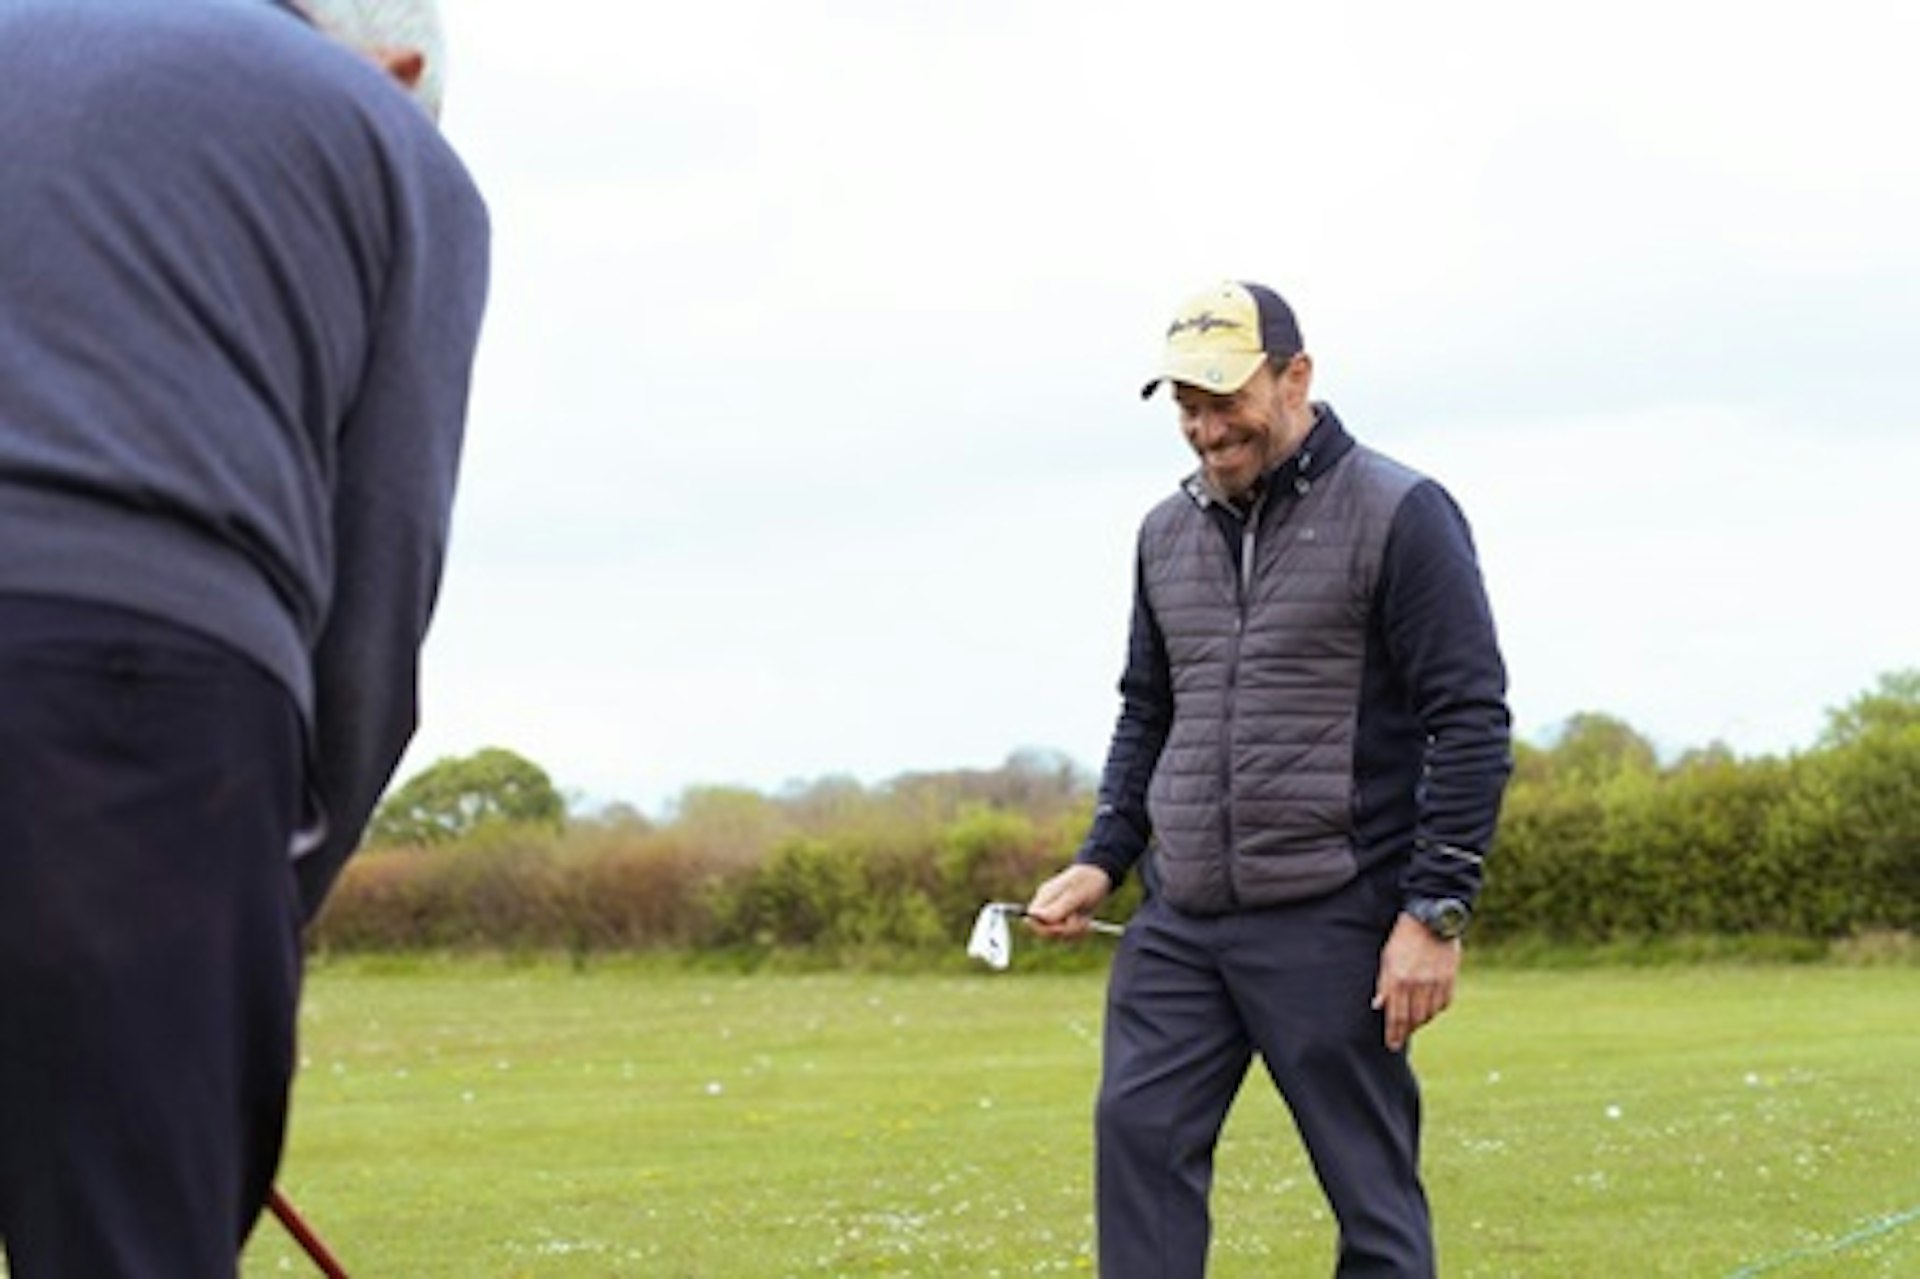 30 minute Golf Lesson for Two with a PGA Professional 2